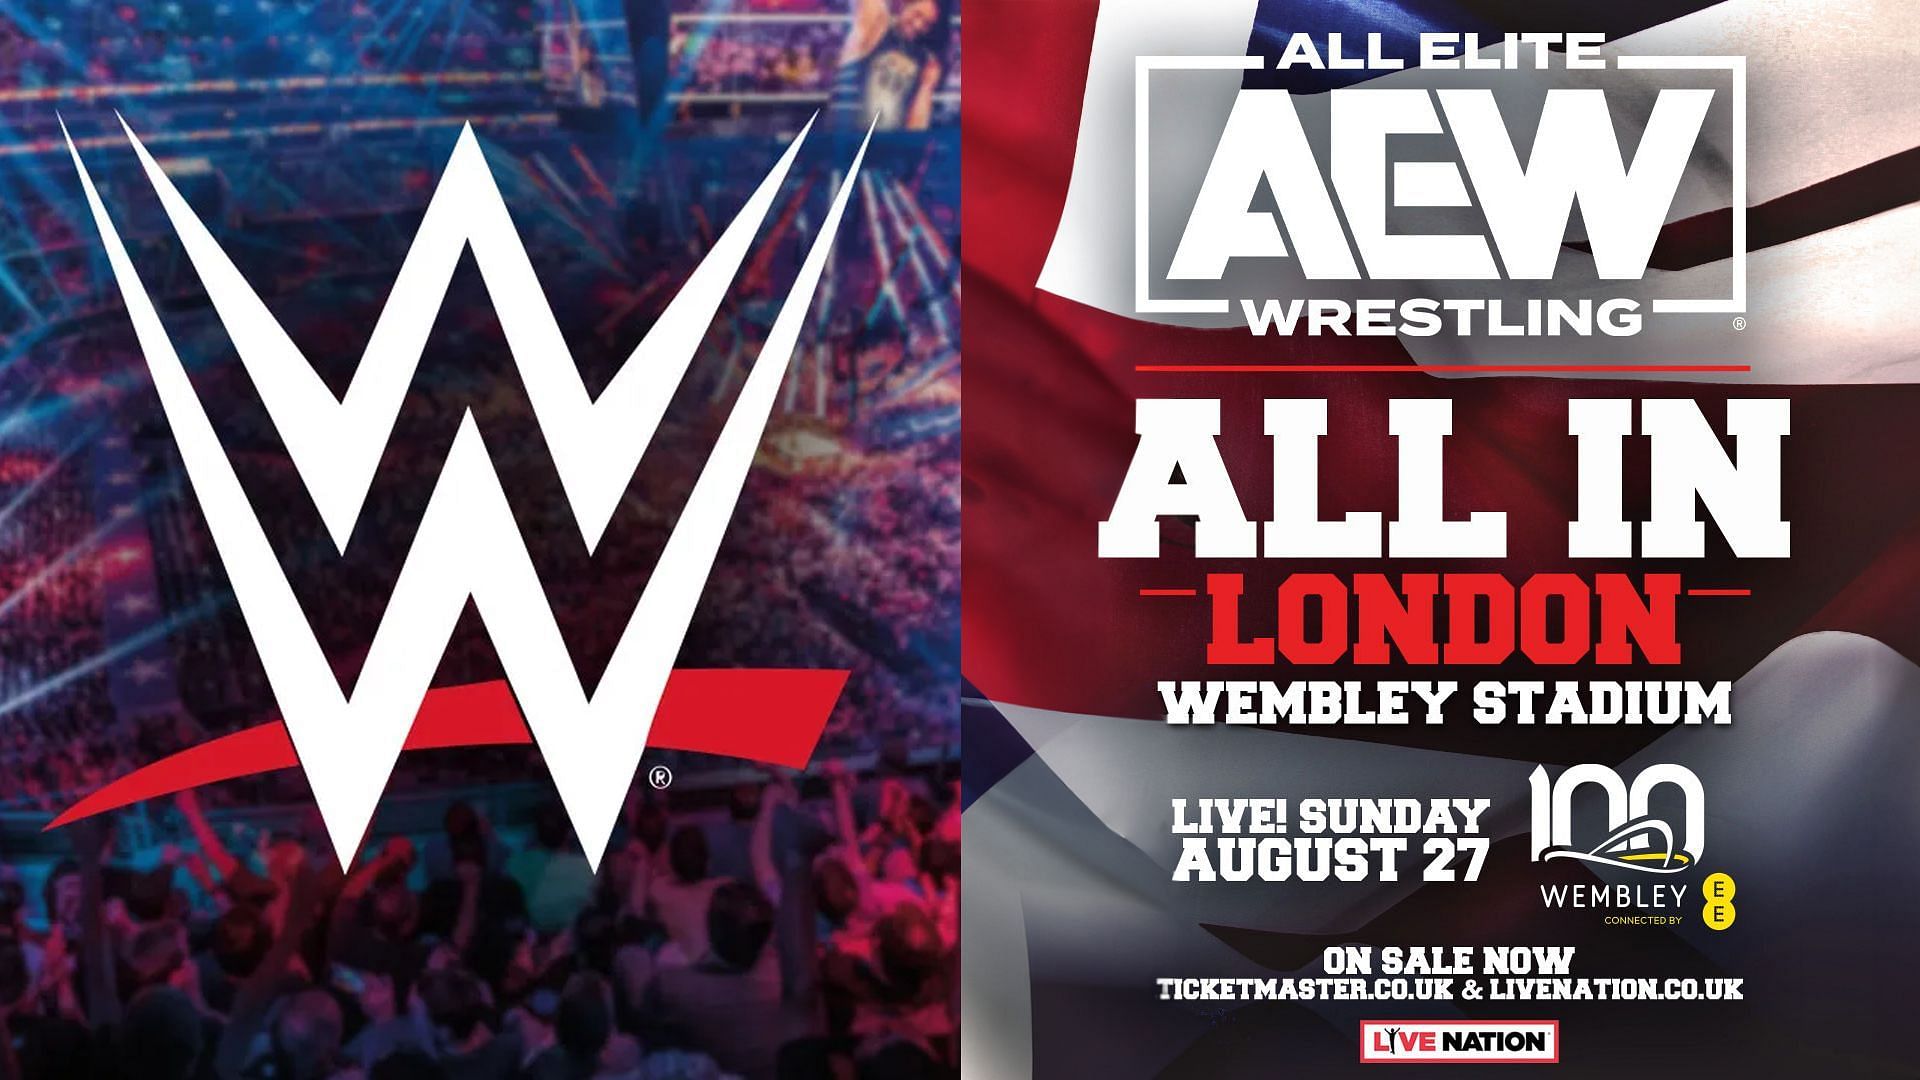 Several former WWE Superstars are competing at AEW All In